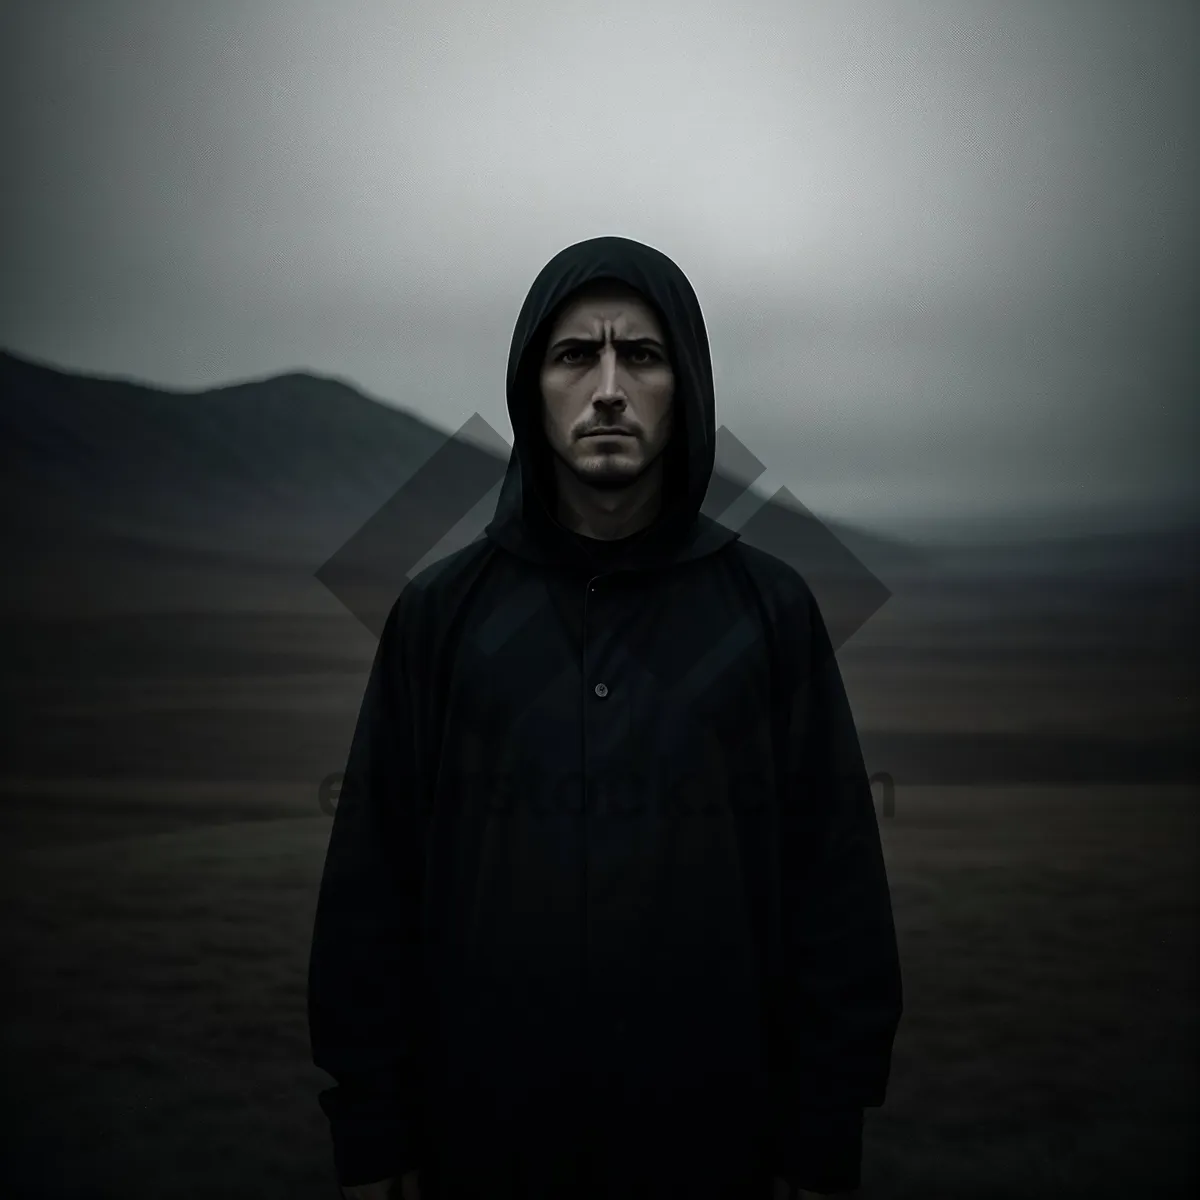 Picture of Dark Cloaked Man with Intense Expression